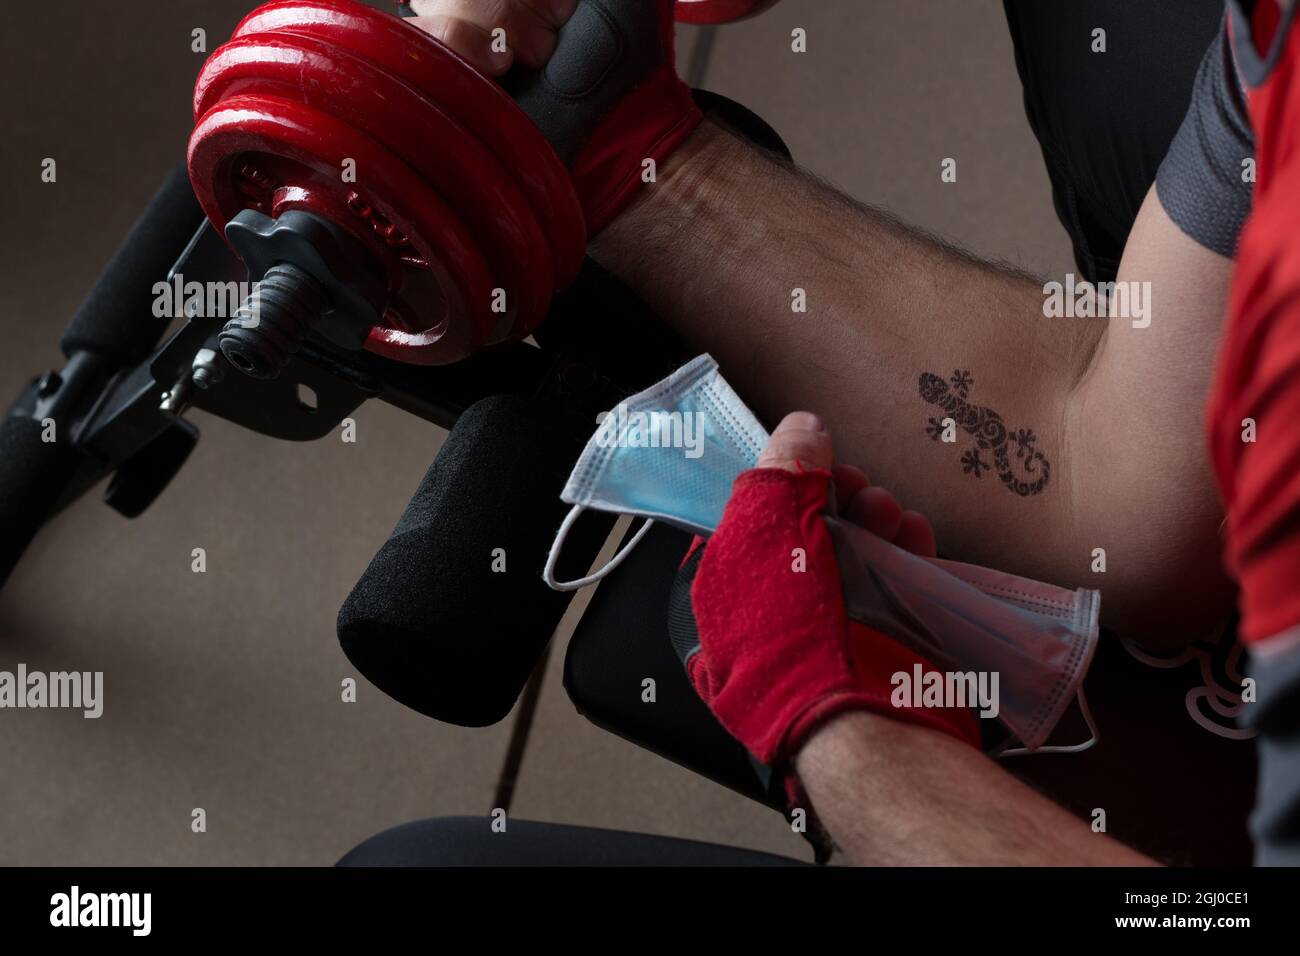 Man's arm with a lizard tattoo working out with a dumbbell and holding a facemask in the other hand Stock Photo